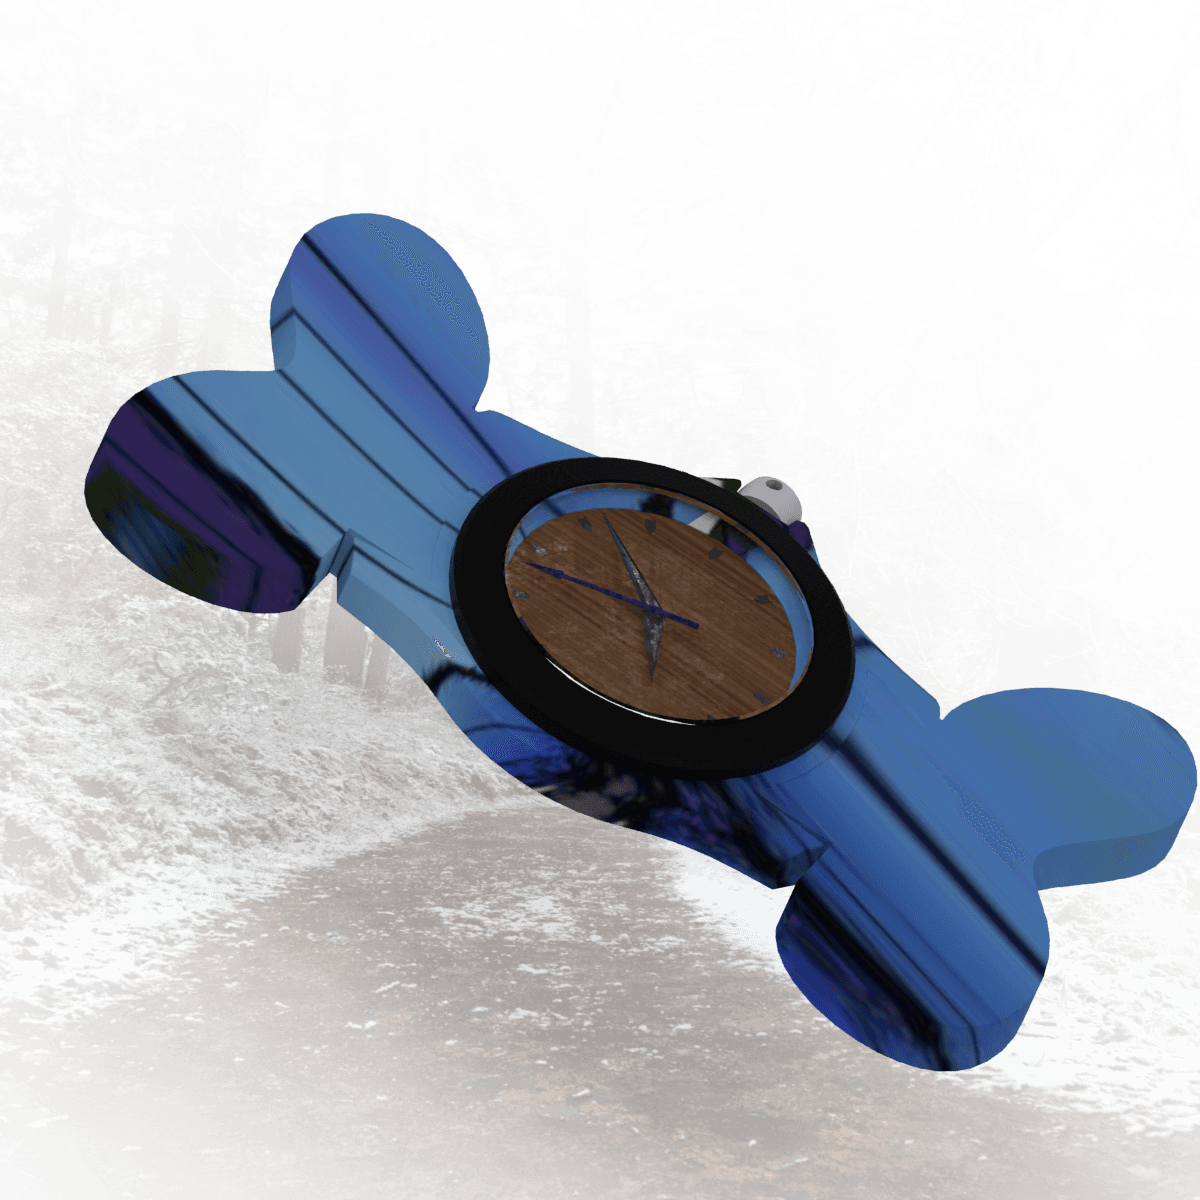 WATCHAFLY 3d model